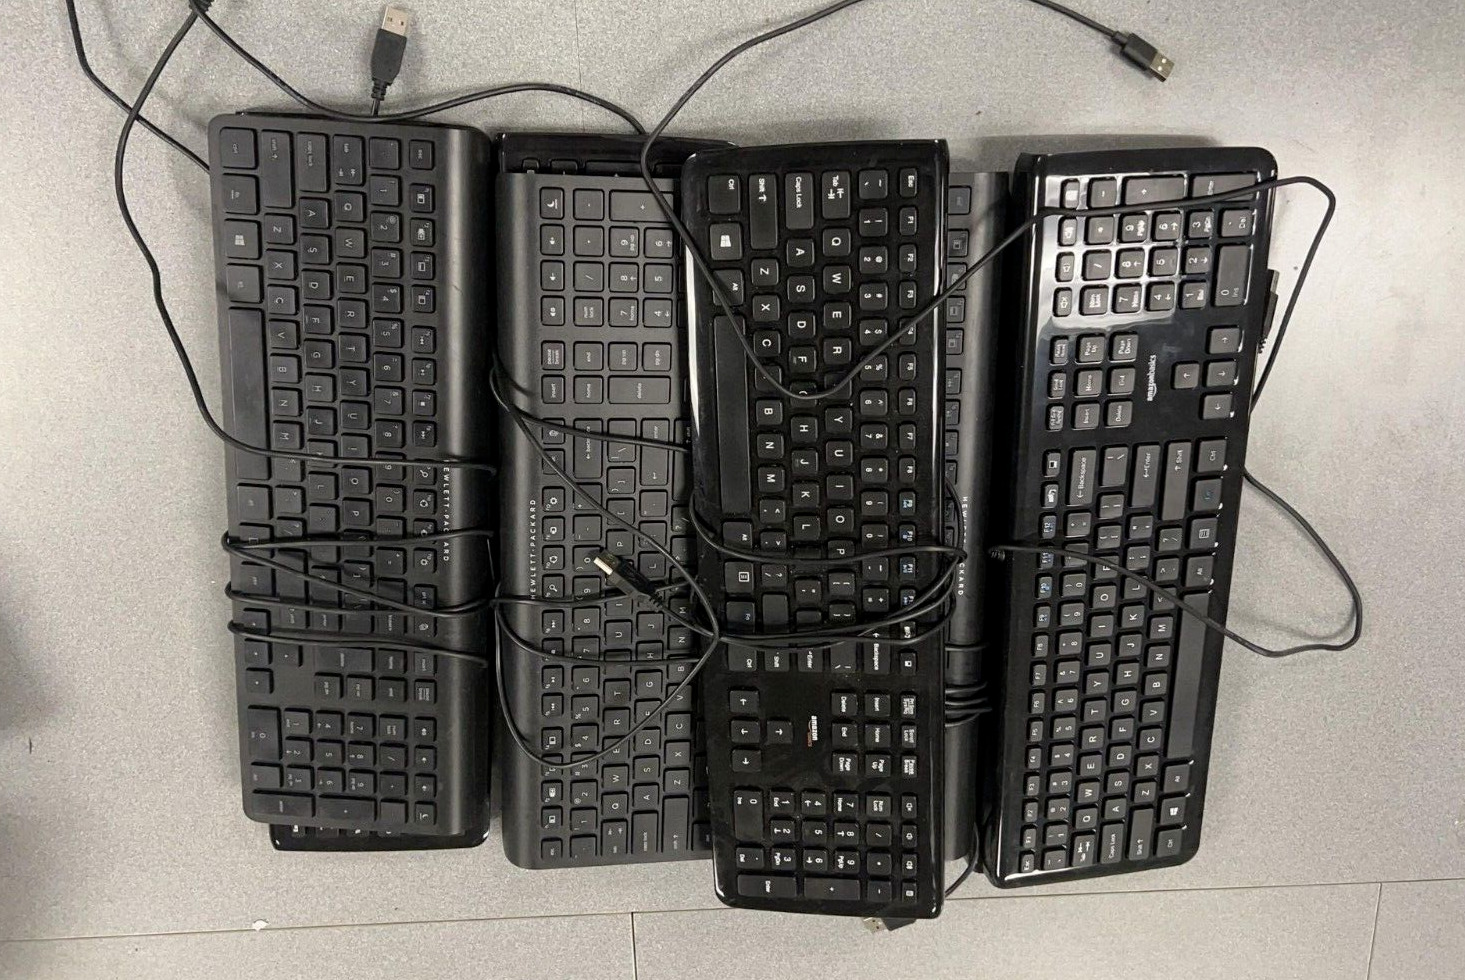 Lot OF 10 - USB Wired Standard Layout Keyboard Mixed Brand Models GRADE A